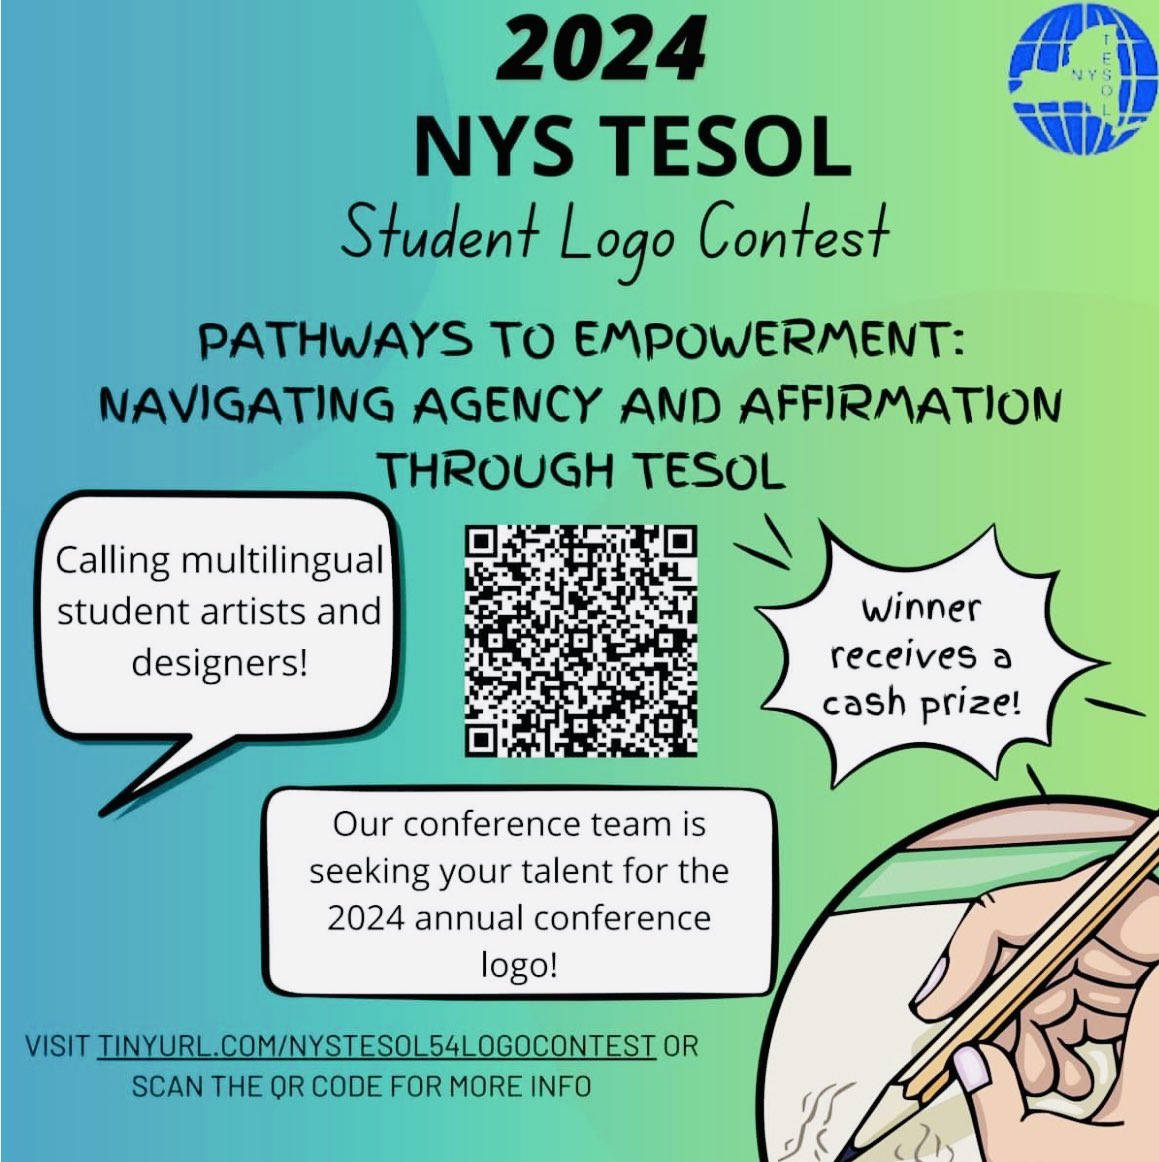 54TH NYS TESOL ANNUAL CONFERENCE
STUDENT LOGO CONTEST📣

NYS TESOL invites creative Multilingual Learners to participate in the 2024 Student LOGO Contest focused around the theme of “ PATHWAYS TO EMPOWERMENT: NAVIGATING AGENCY AND AFFIRMATION THROUGH TESOL”.

⚠️DEADLINE: 5/26/24